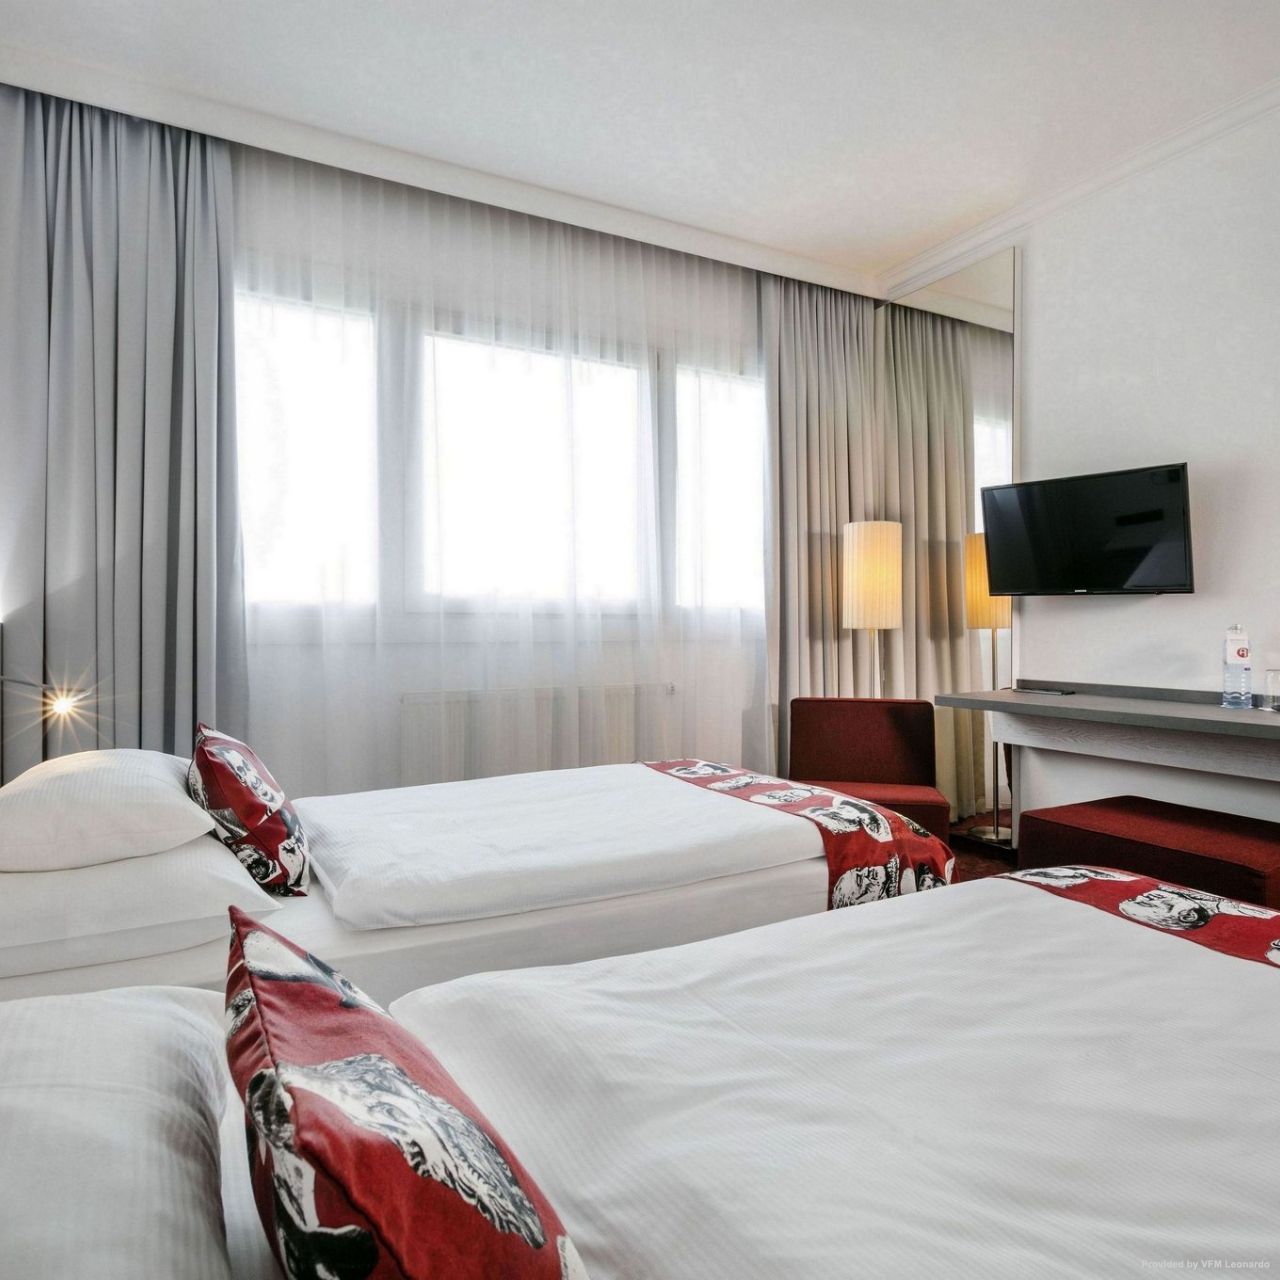 Hotel Arcotel Nike - Linz - Great prices at HOTEL INFO